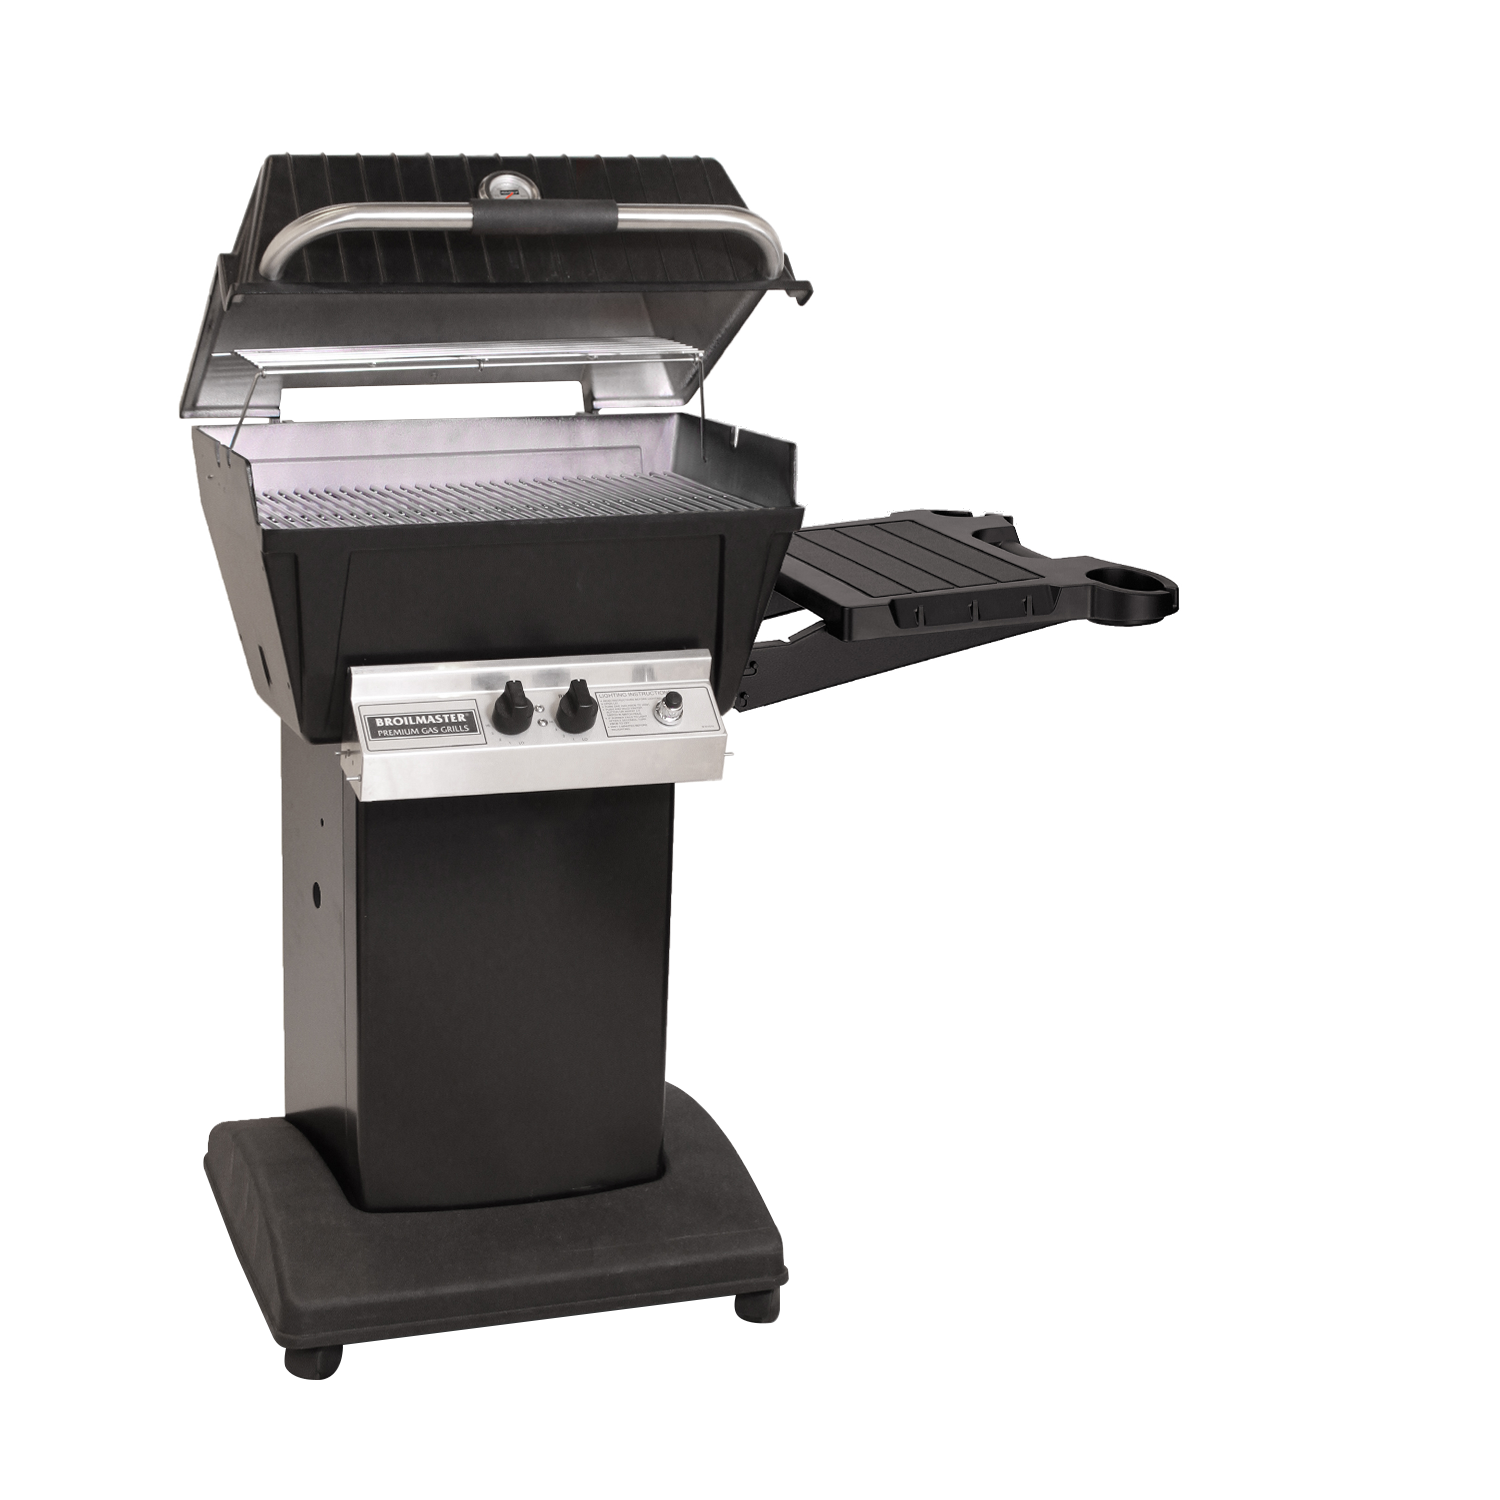 Deluxe Gas Grill Packages